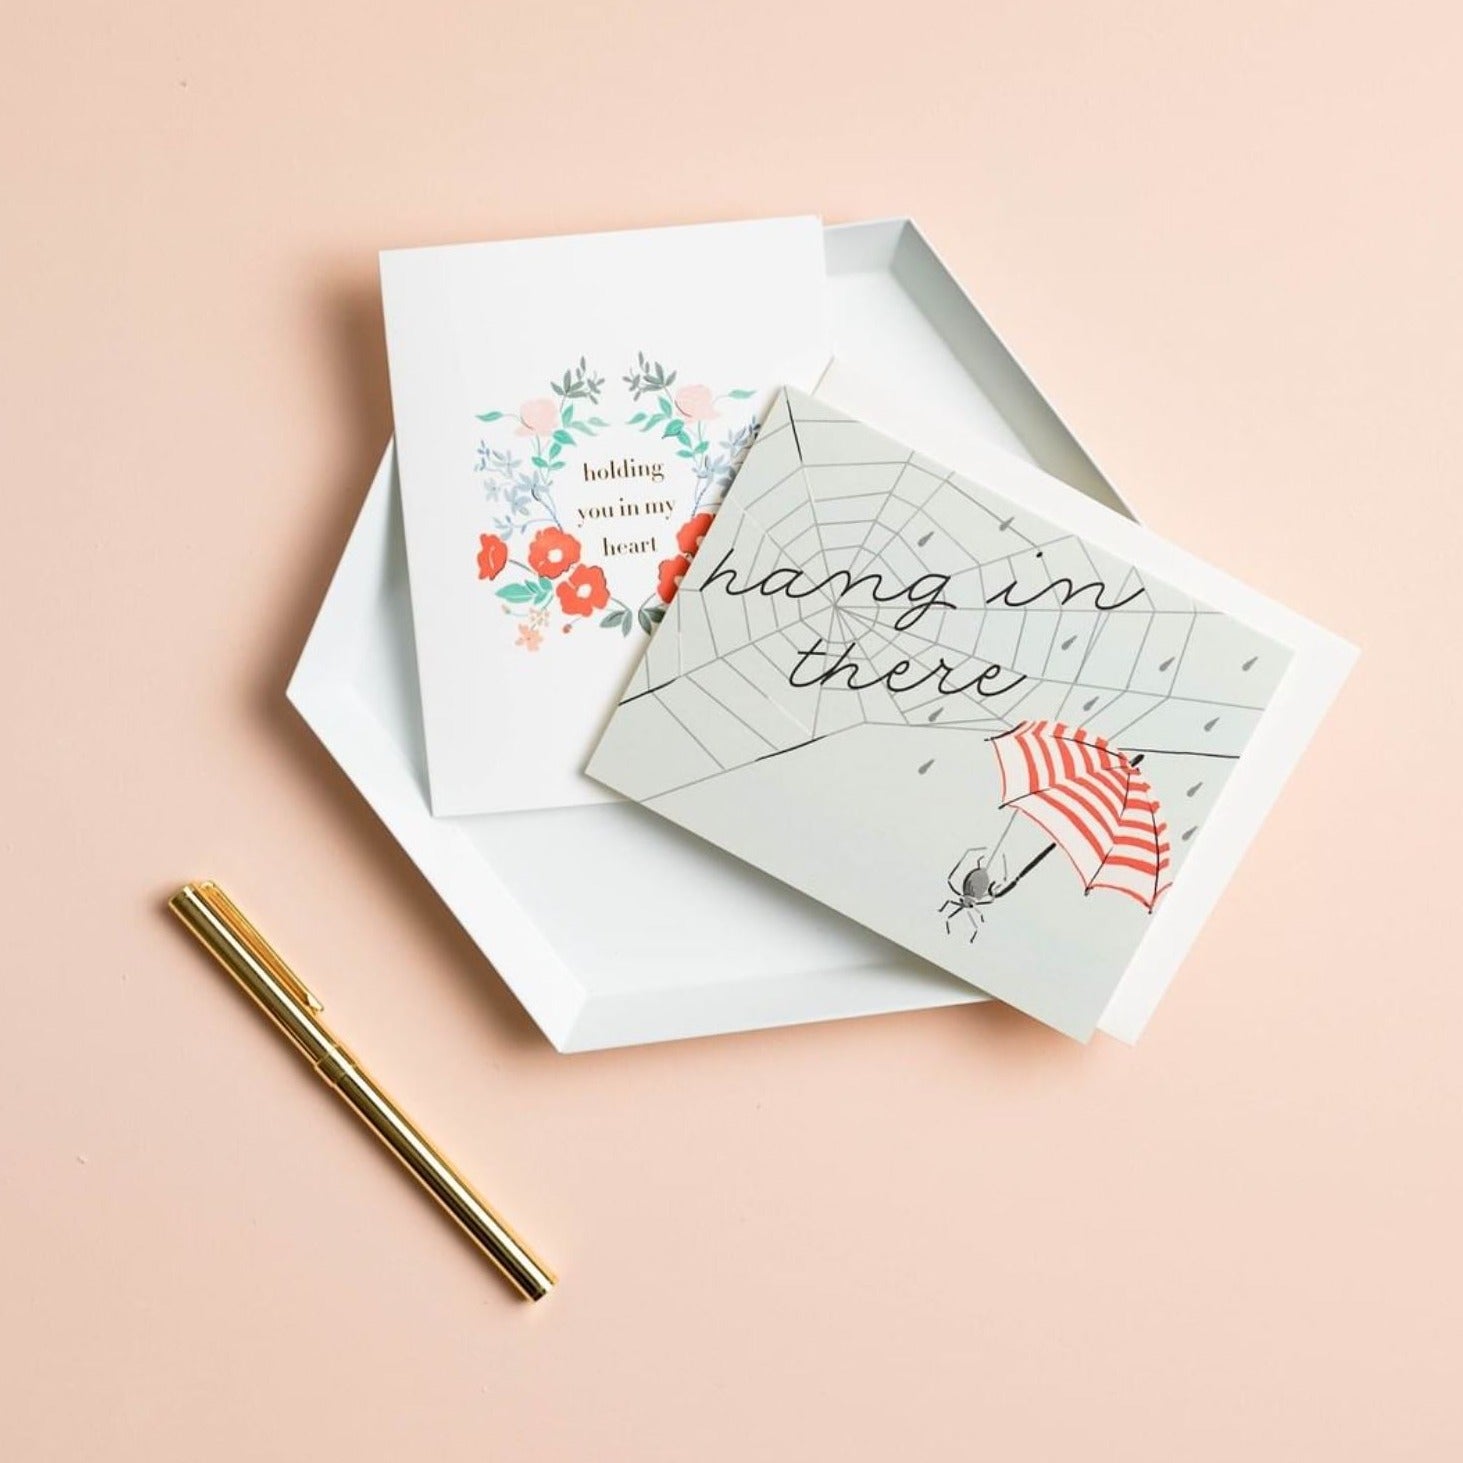 Illustrated sympathy card on premium warm white cardstock, sitting on a white ceramic tray on a peach background, featuring a spider web with the words 'Hang in There' and a spider holding a red and white striped umbrella on a pale blue background.